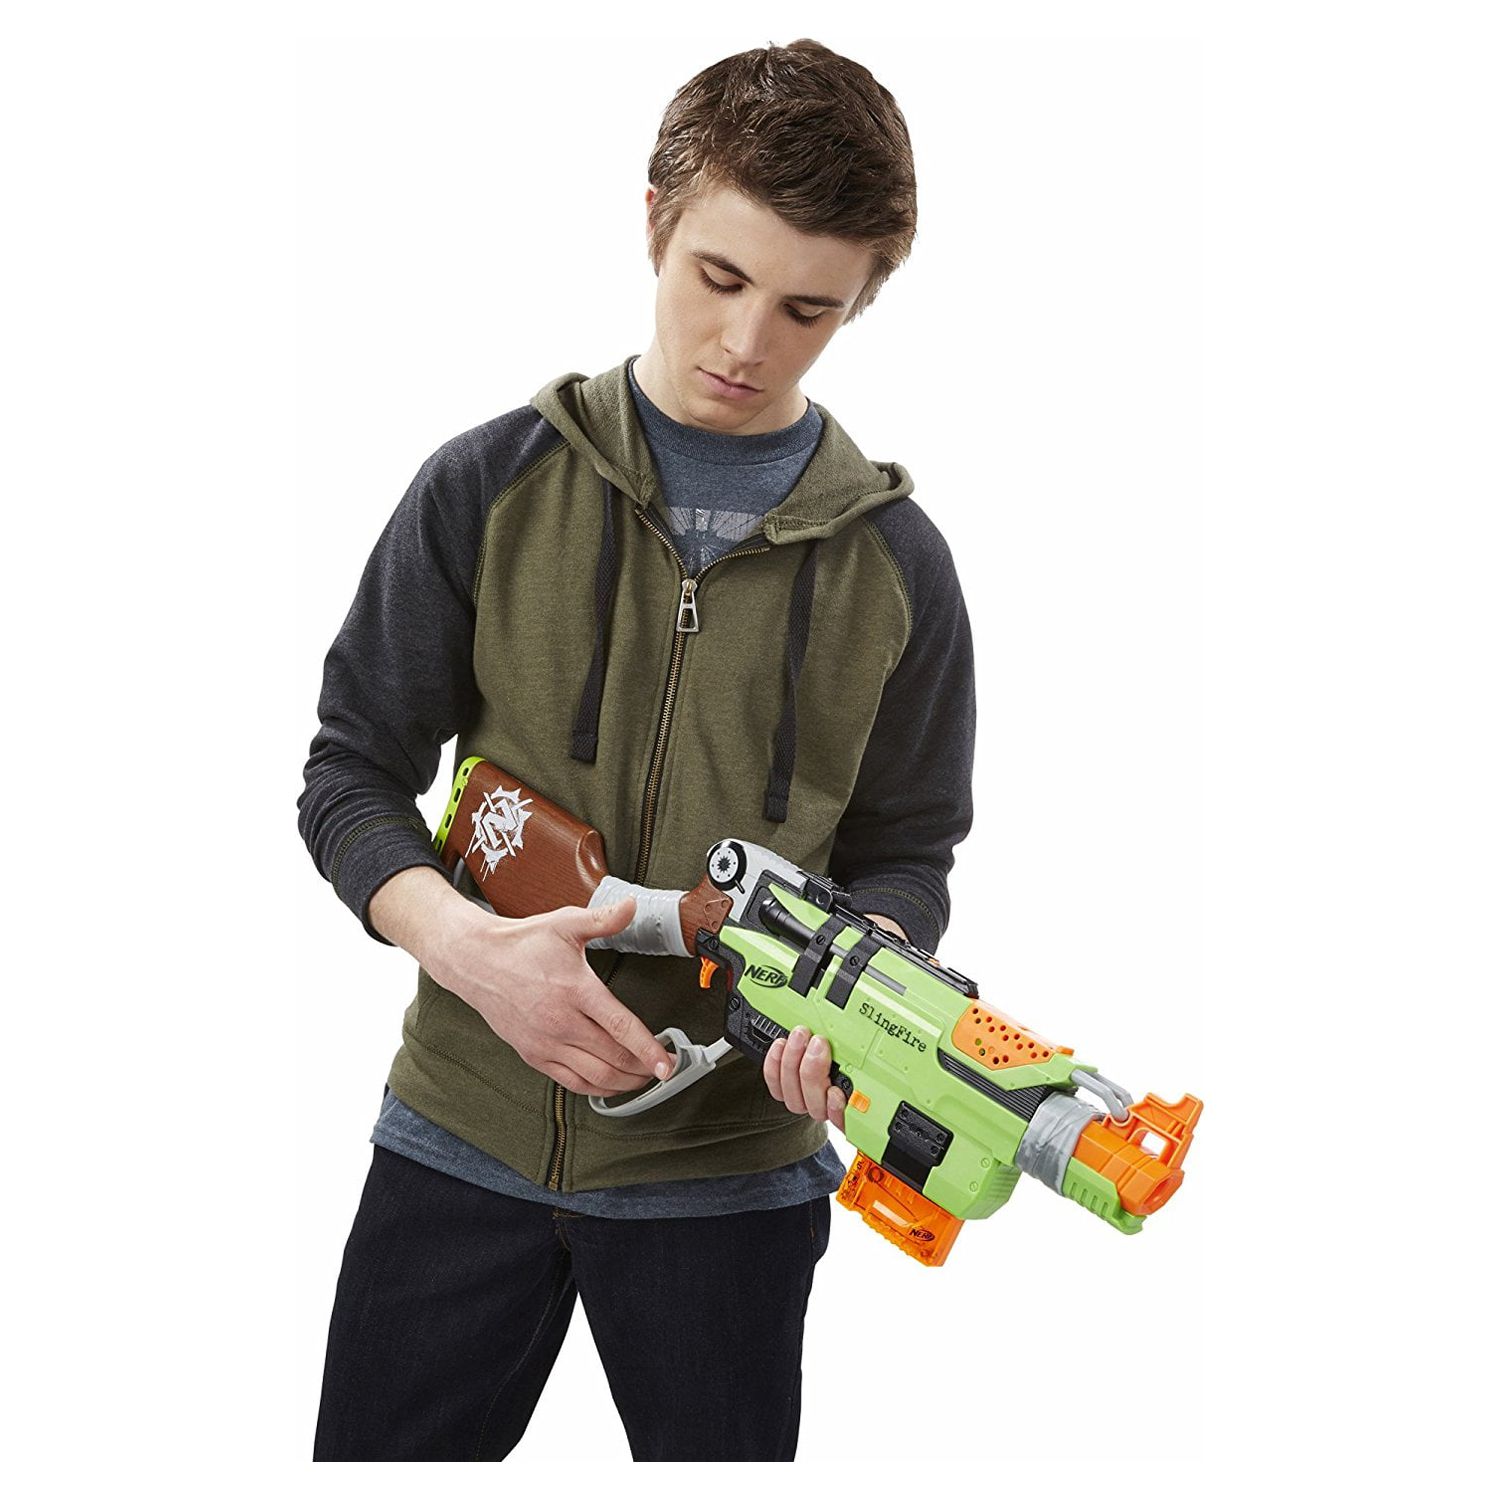 Nerf Zombie Strike SlingFire, for Kids Ages 8 and up - image 4 of 7